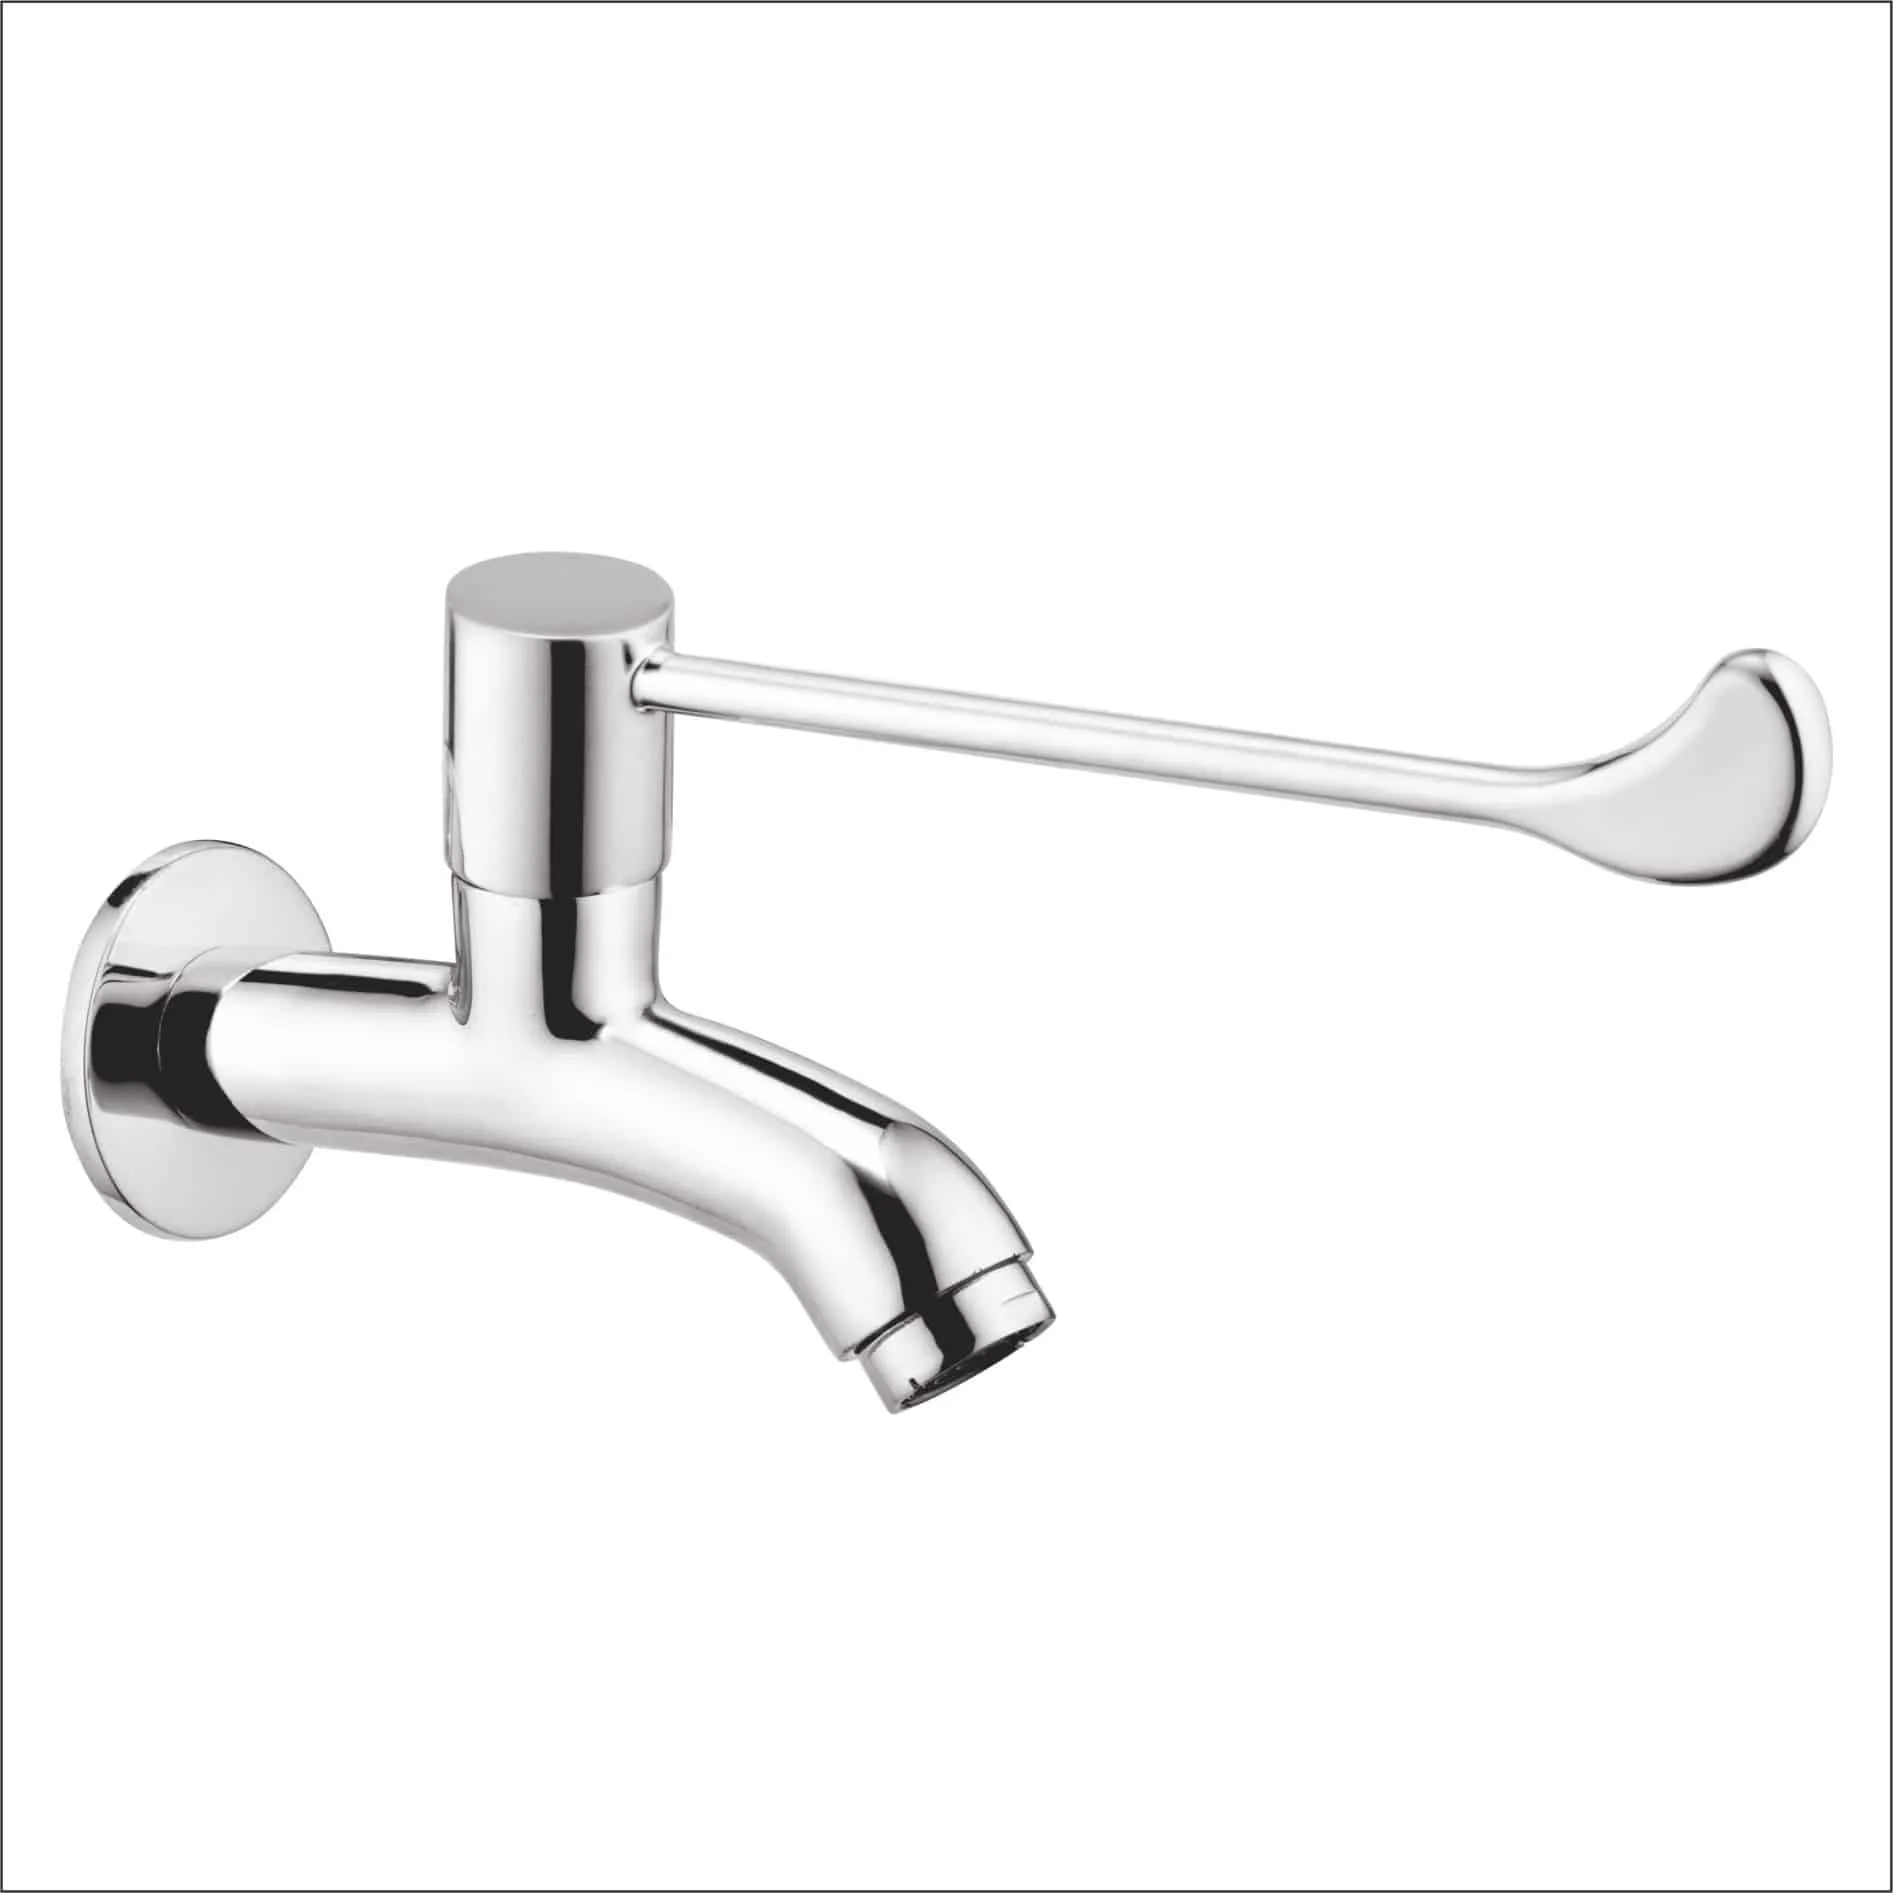 Goeka water mixer lab tap and other cp fittings at the best price